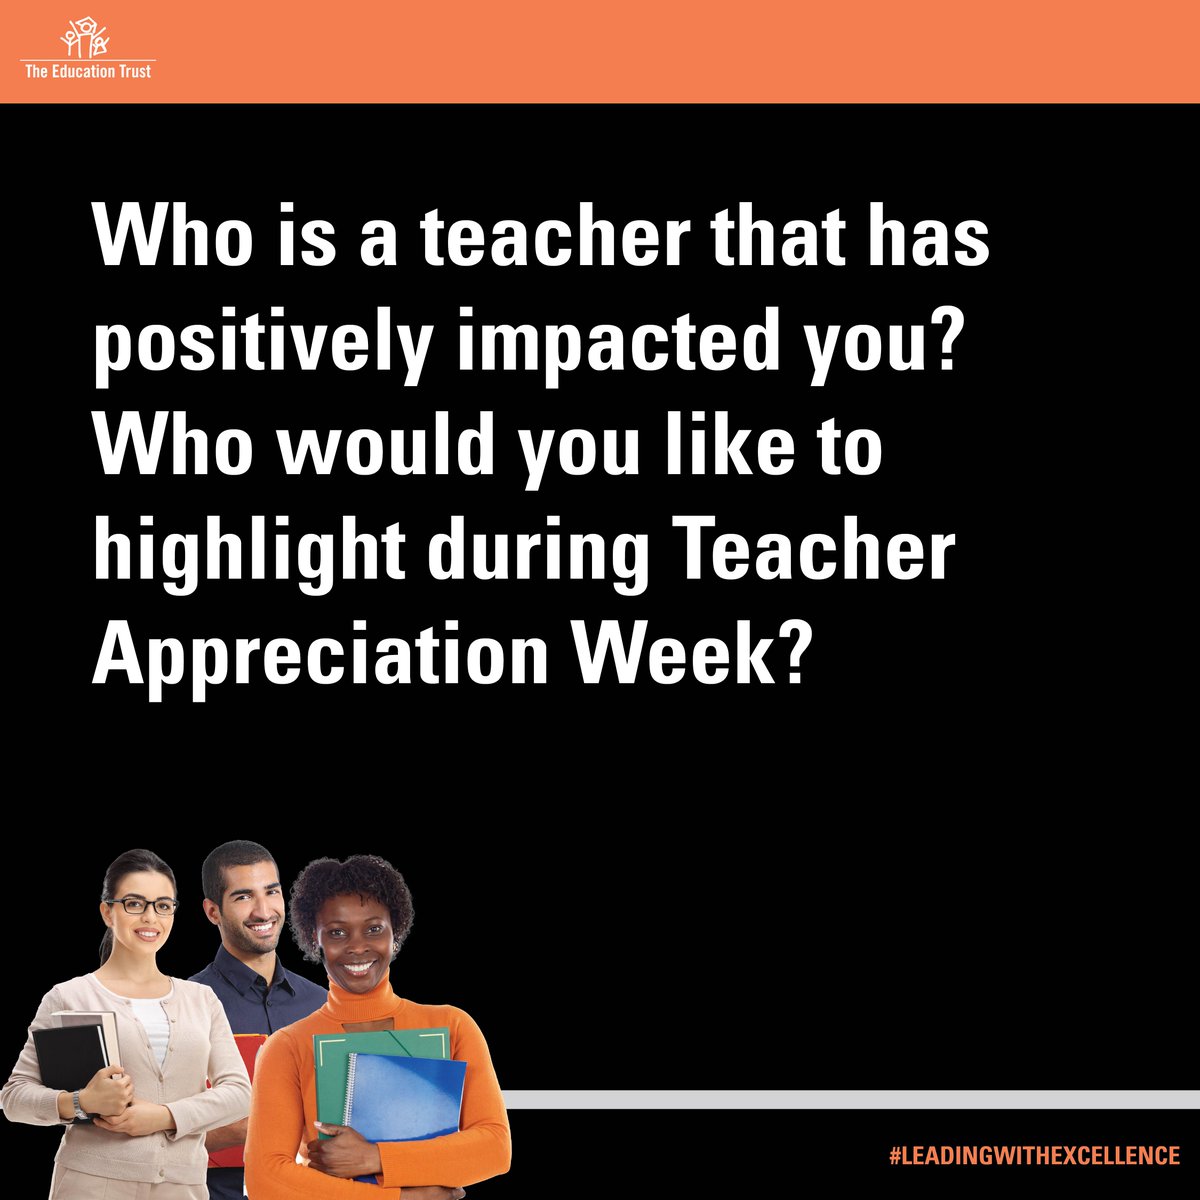 It's #TeacherAppreciationWeek! Do you know an educator who is #LeadingwithExcellence? Spotlight them this Teacher Appreciation Week by thanking them in the comments below or by sharing a story: loom.ly/1AQF084 #ThankATeacher